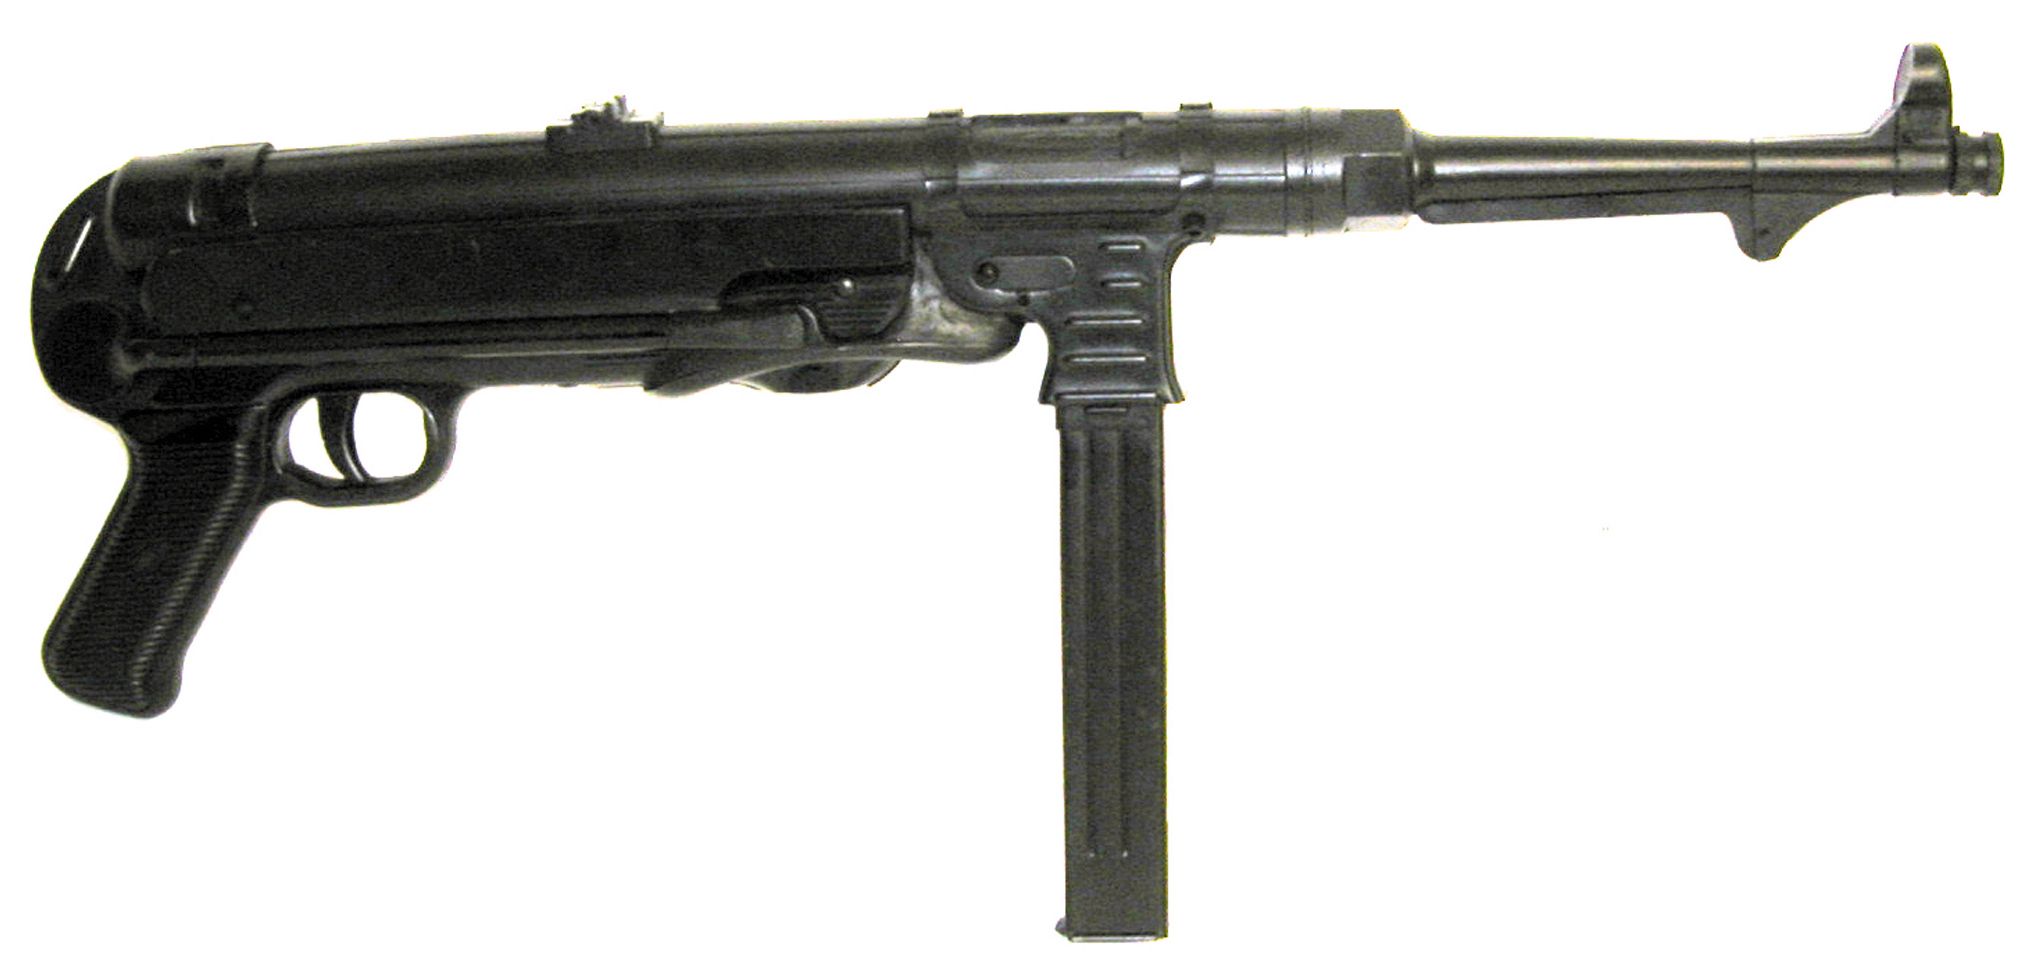 Solid resin copy of a MP-40 submachine gun painted to replicate real metal.